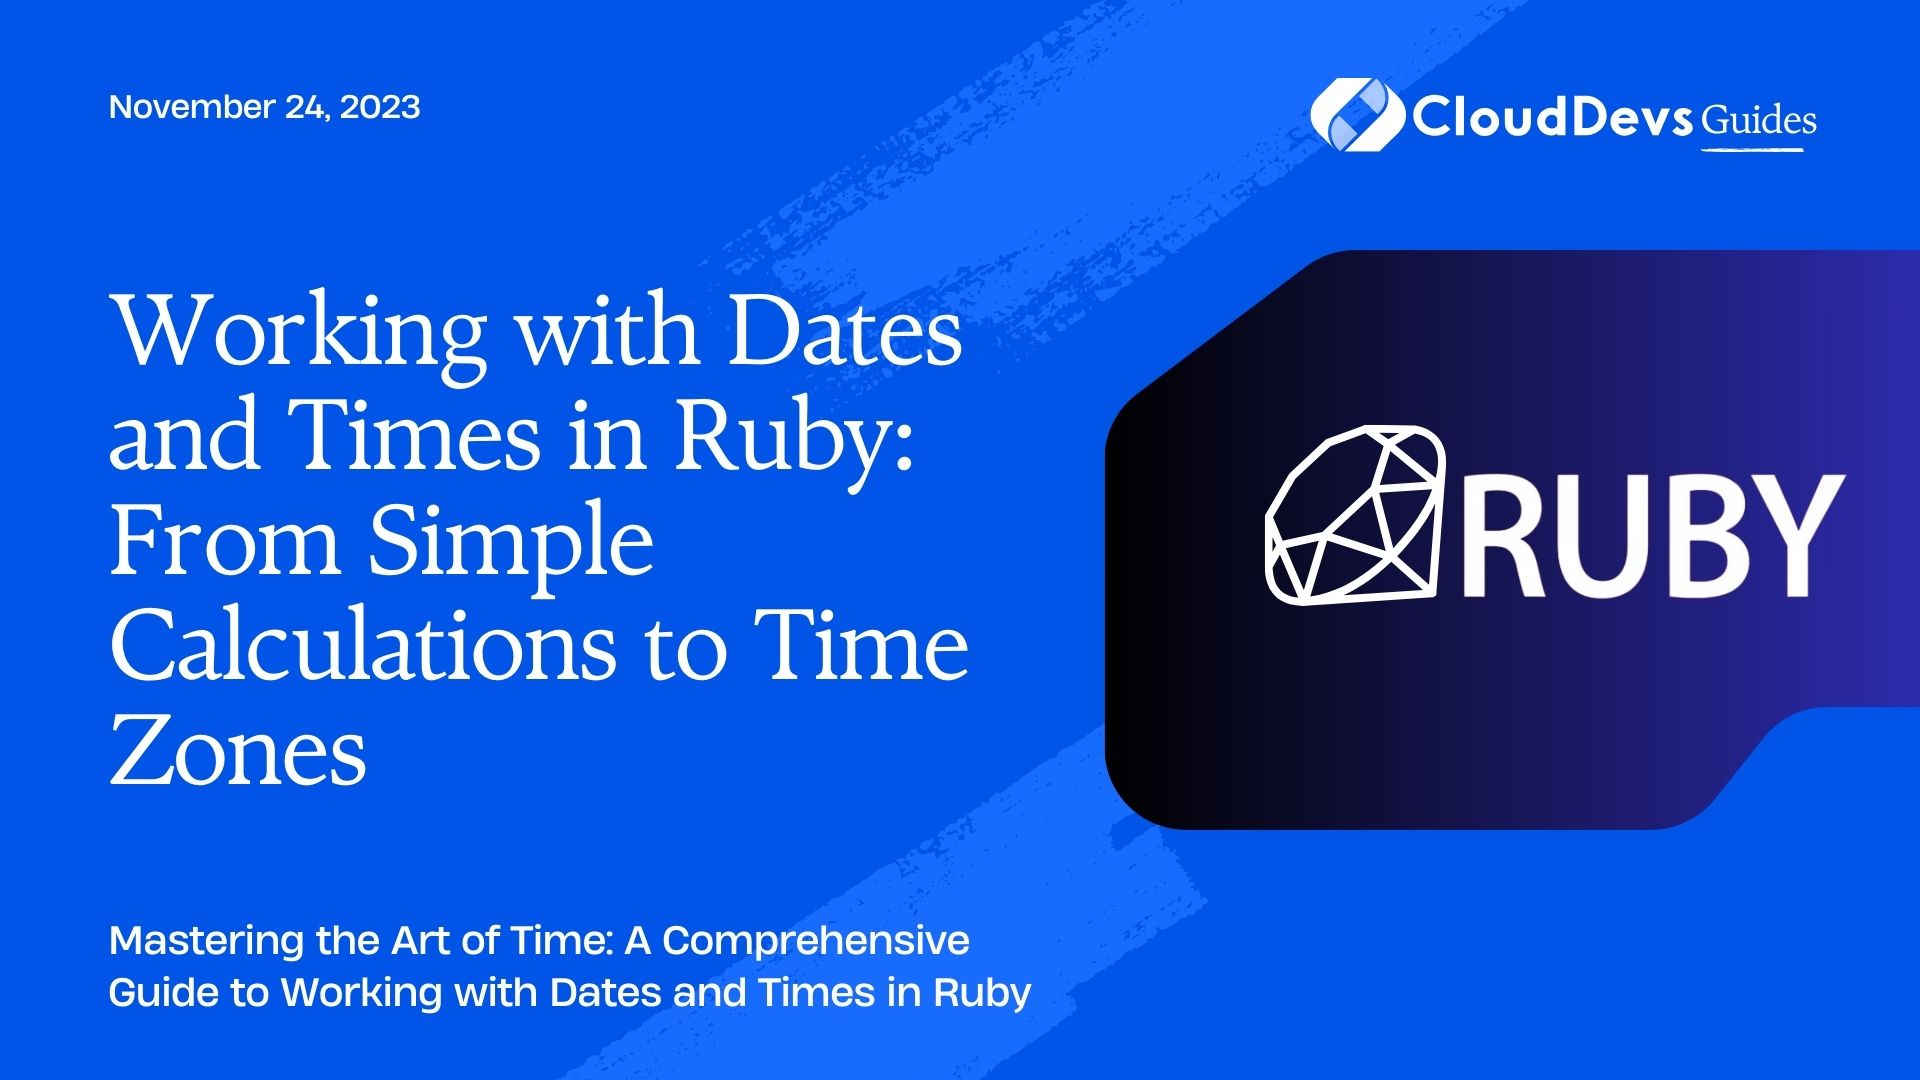 Working with Dates and Times in Ruby: From Simple Calculations to Time Zones